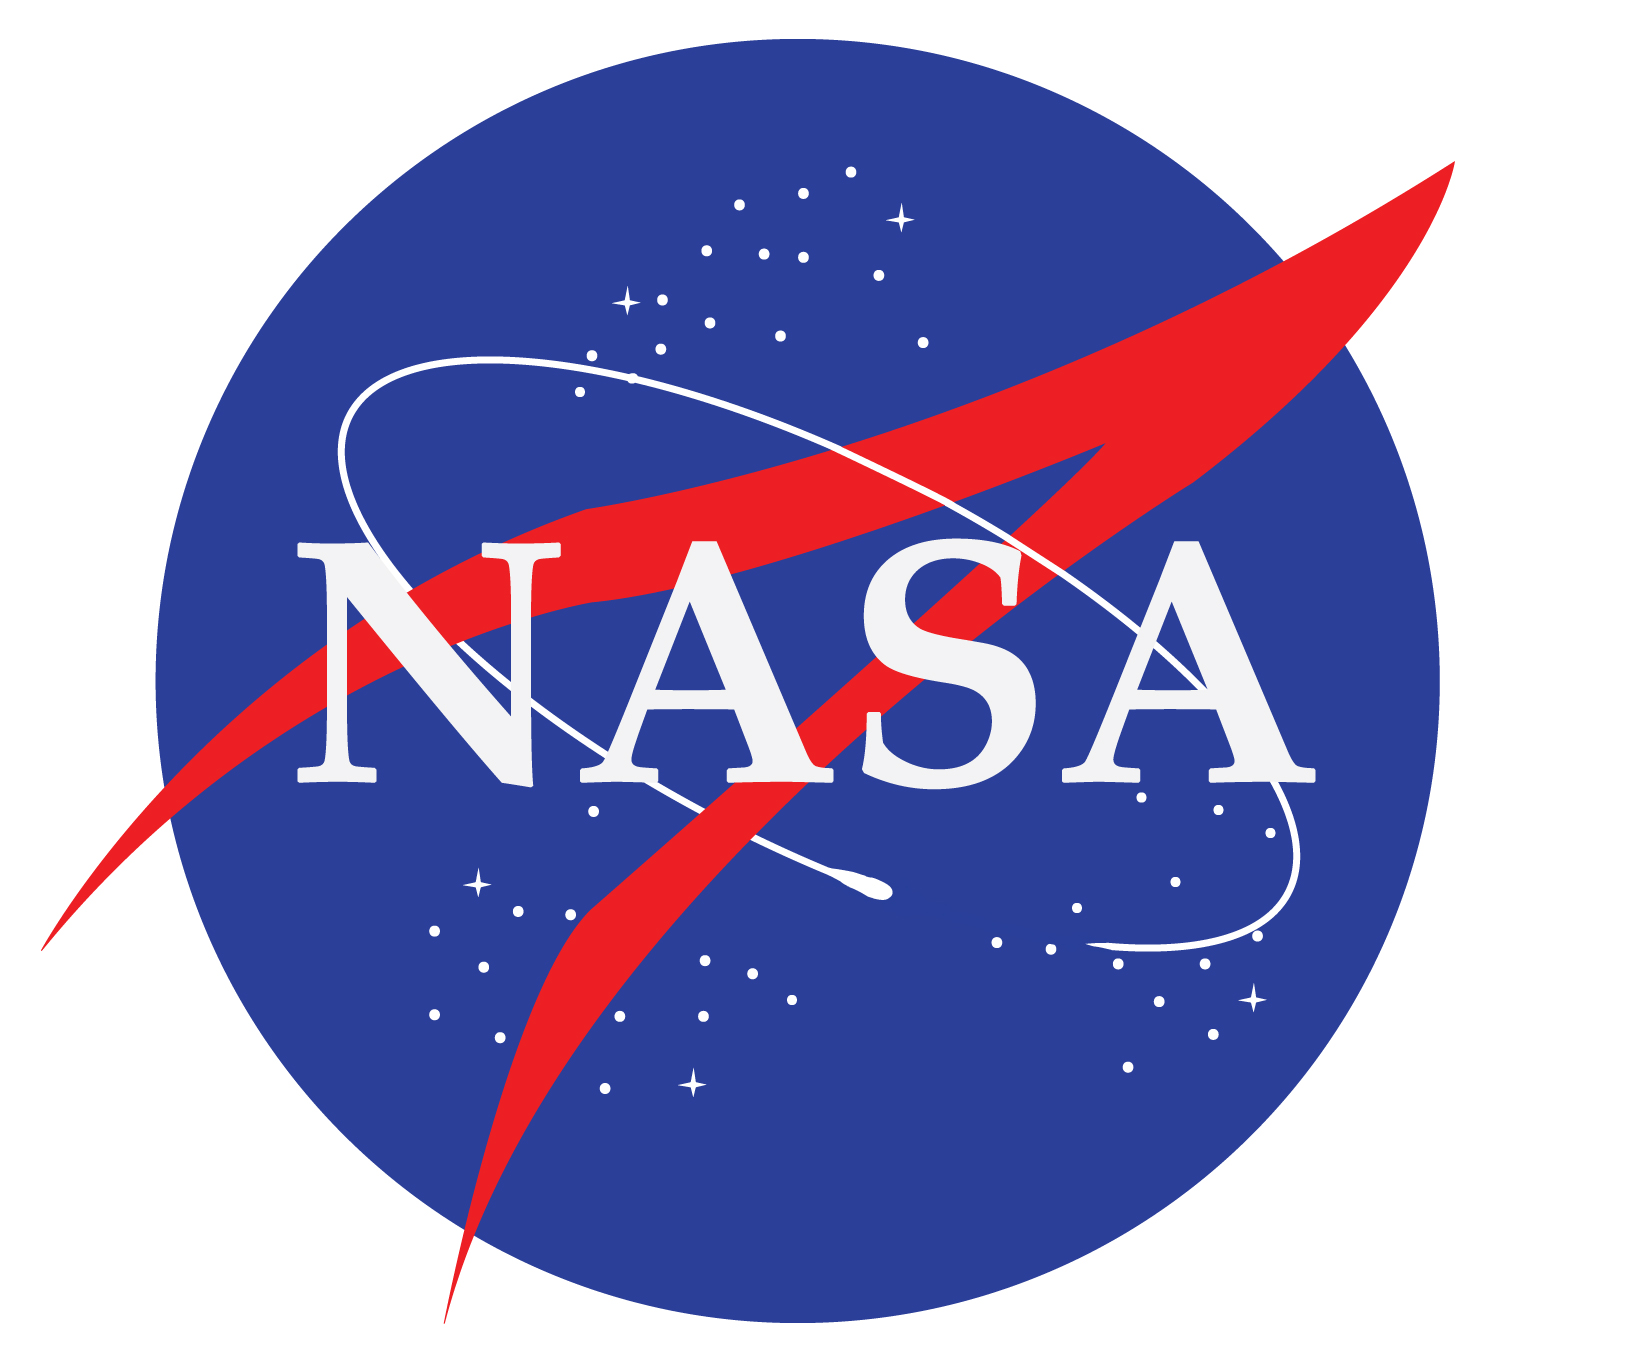 In This Mission I Drew Up The Nasa Logo  Here Is The Full Image